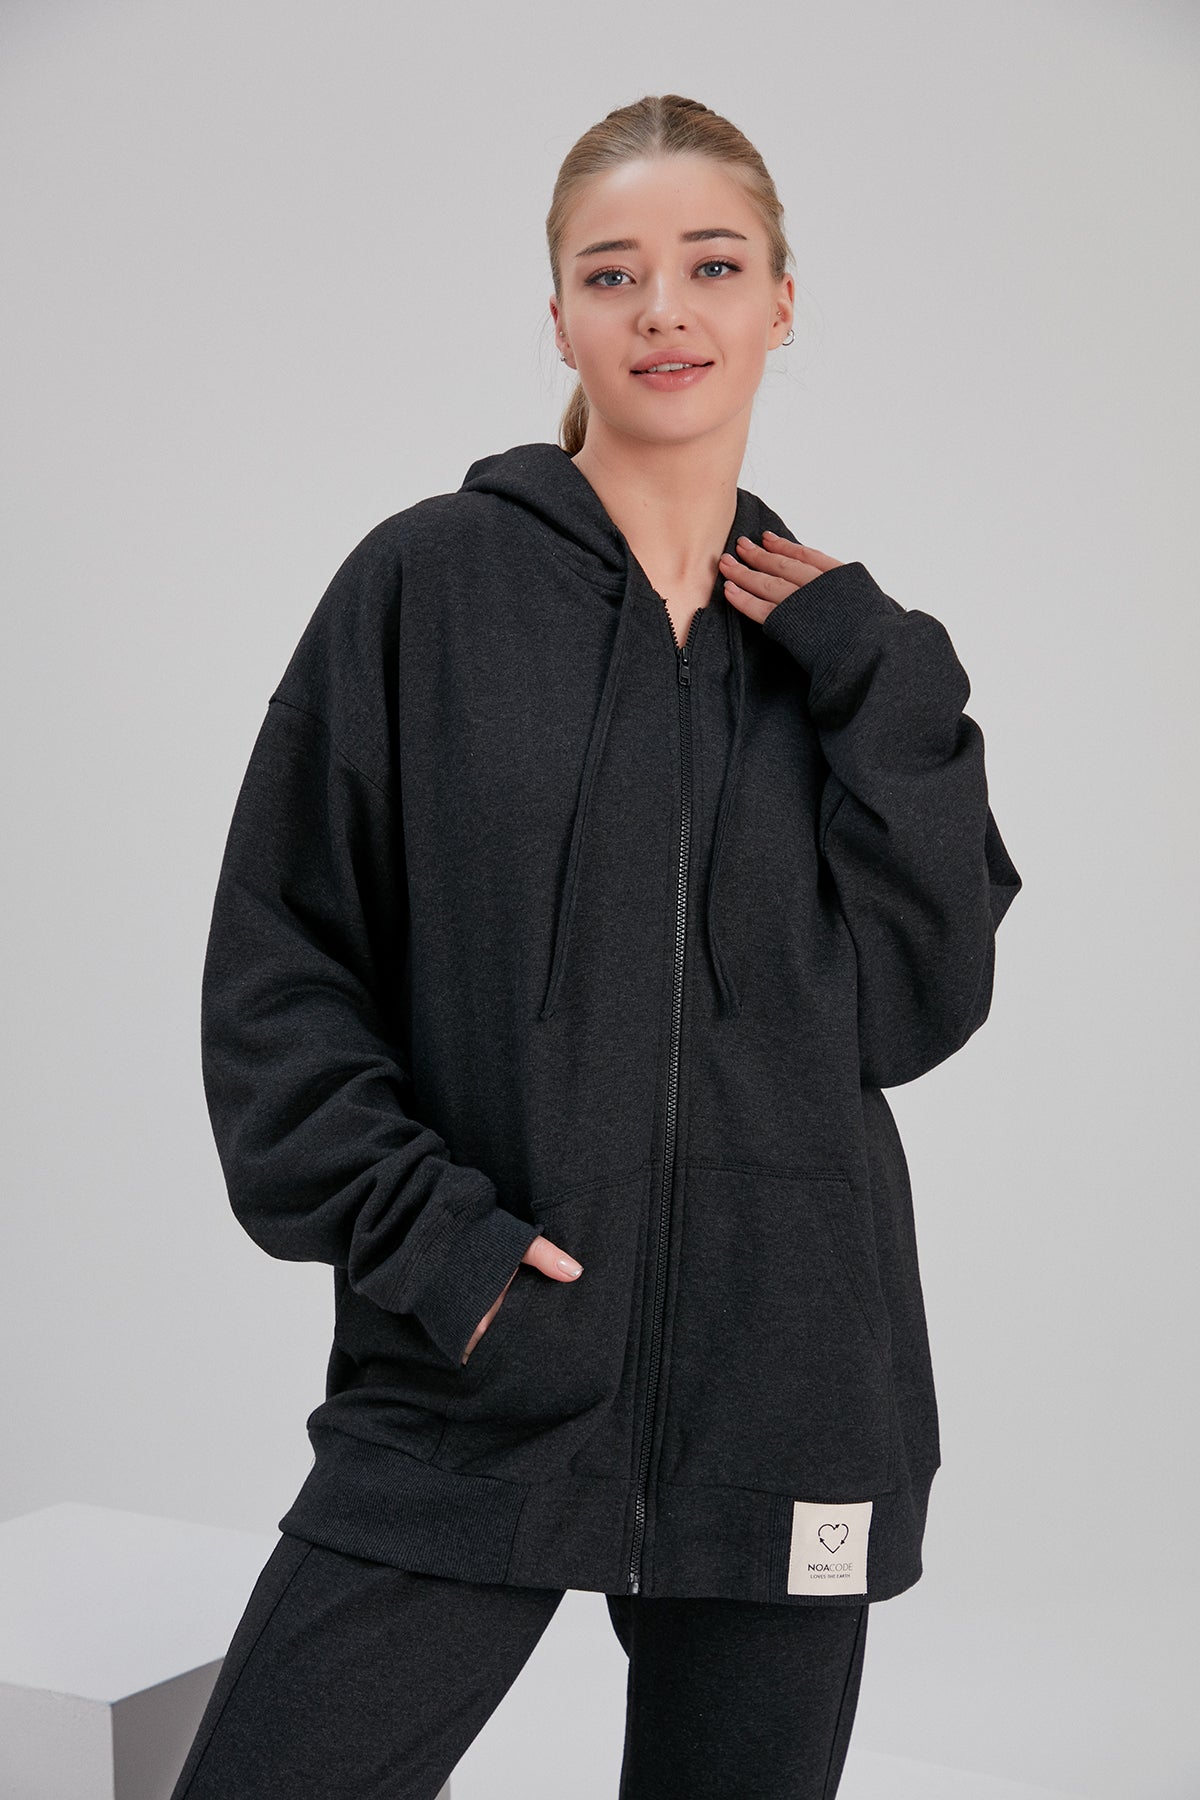 Noacode sustainable zip-up hoodie perfect for plus tall and maternity fashion Netherlands Germany Belgium UK